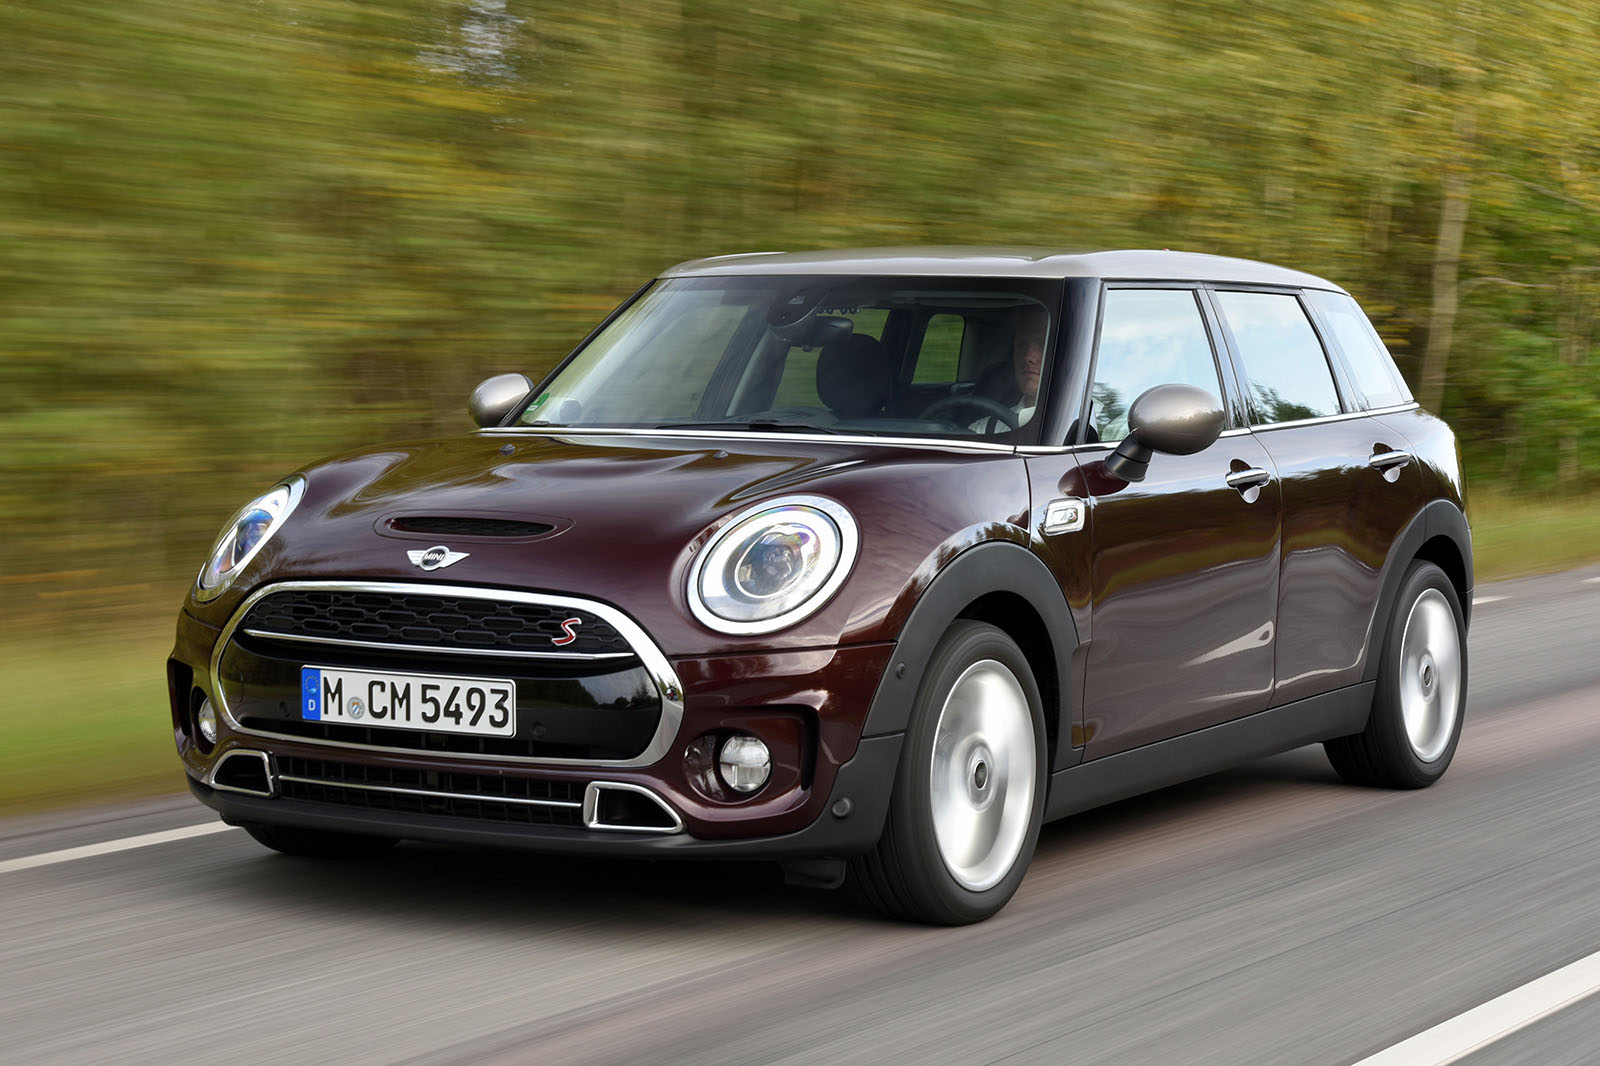 https://www.autocar.co.uk/sites/autocar.co.uk/files/images/car-reviews/first-drives/legacy/mini-clubman-cooper-s-0001.jpg